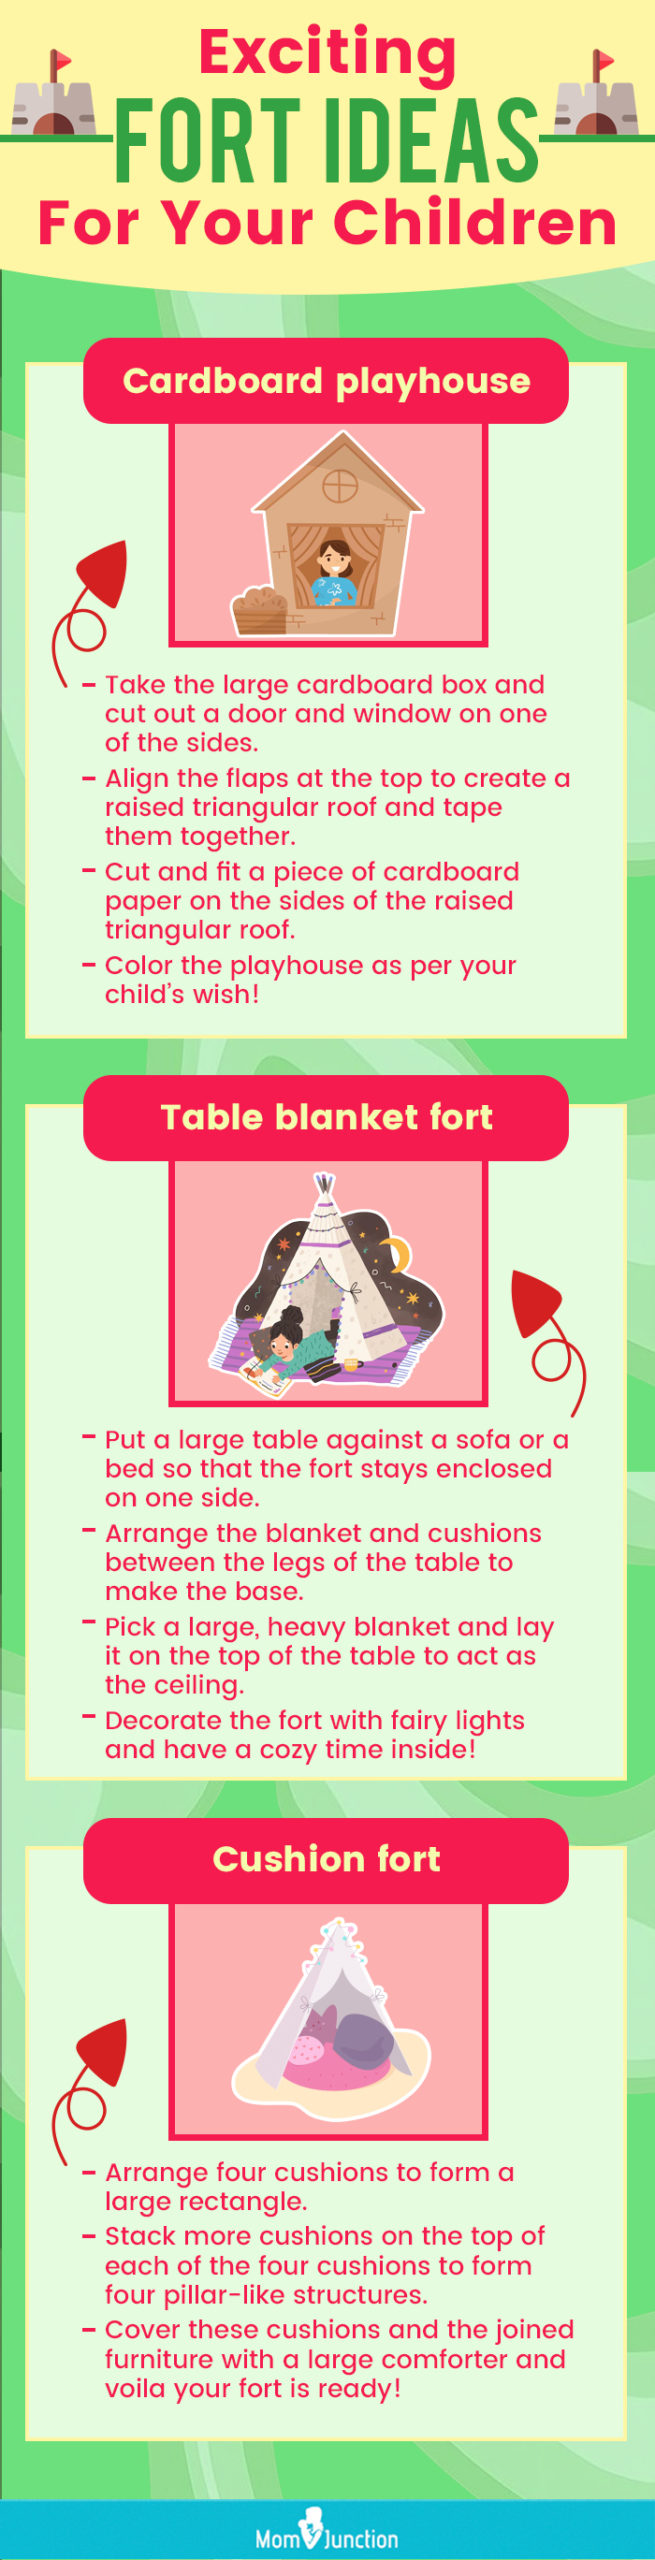 How to Make a Blanket Fort: 4 Easy Steps